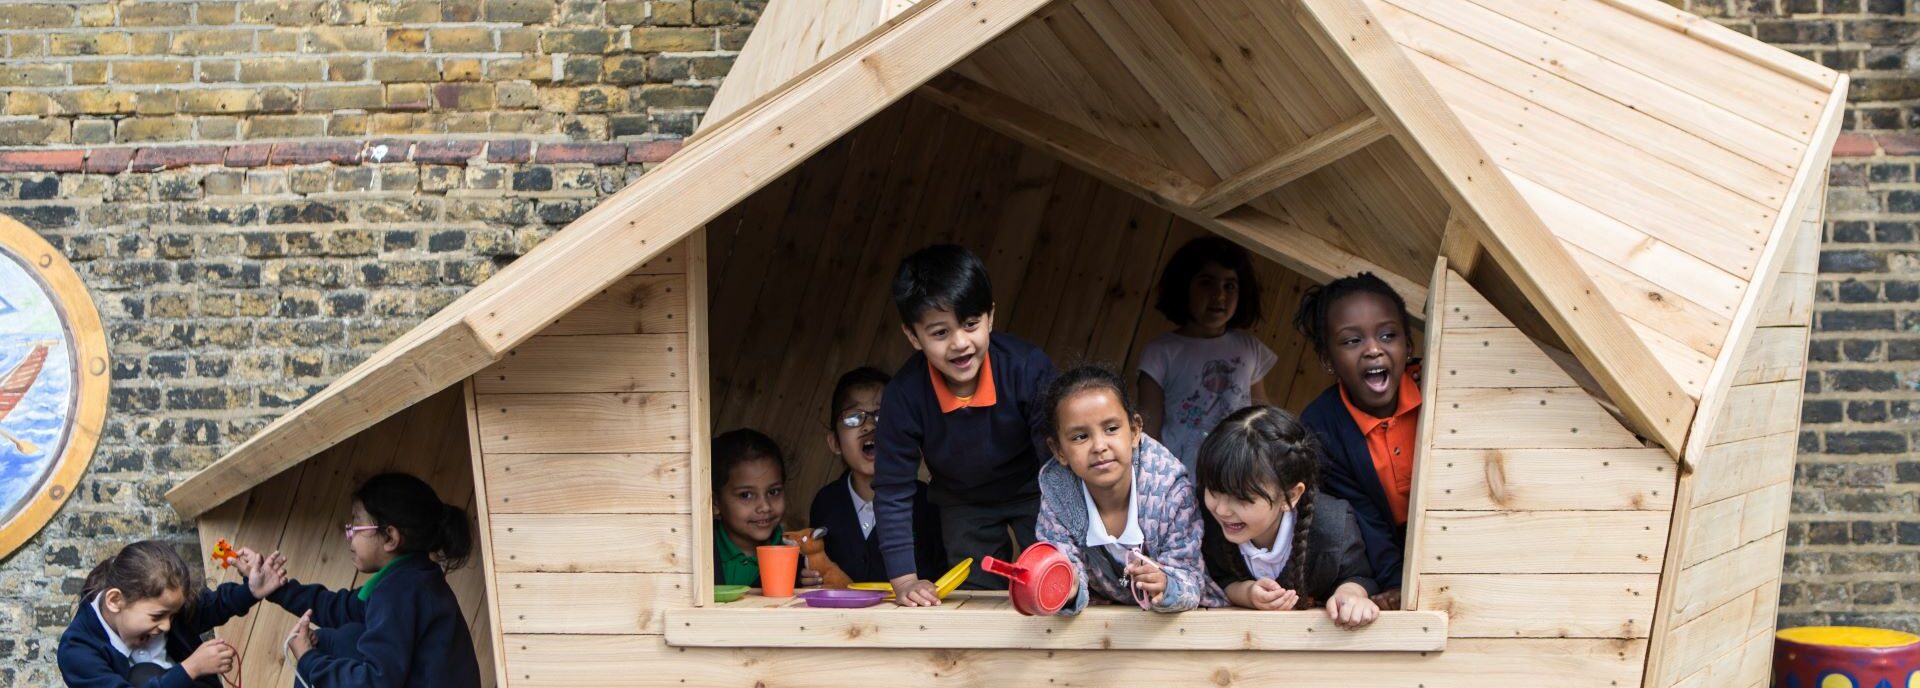 Pupils play in a wooden structure, that resembles a house